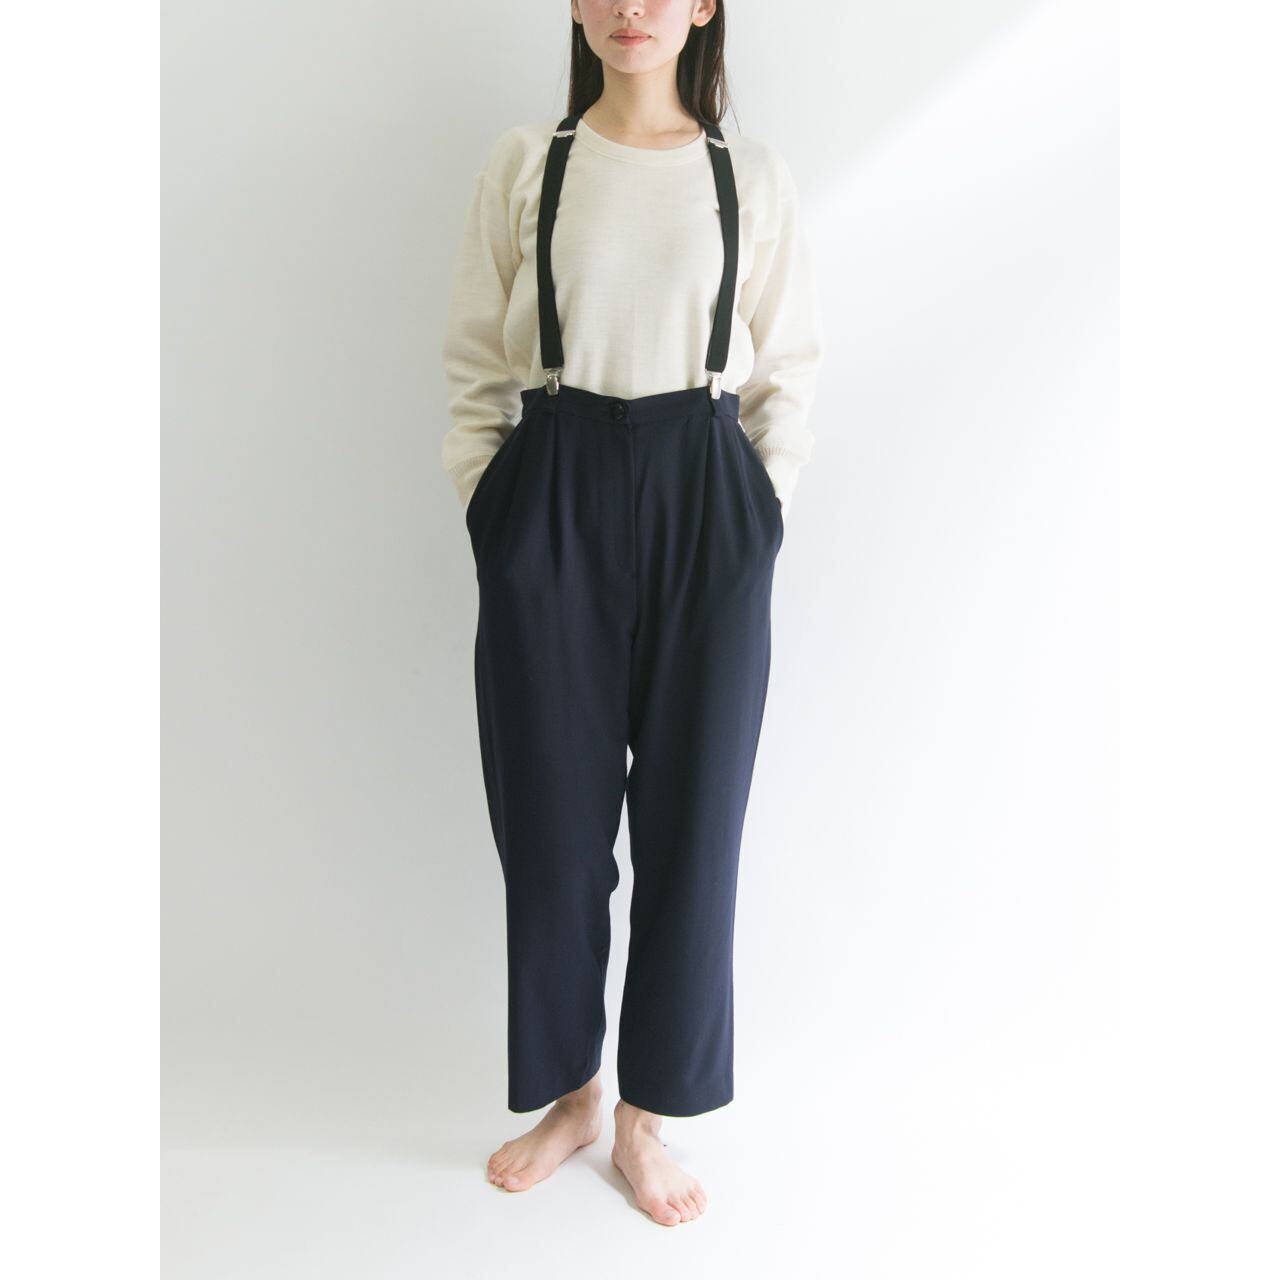 【Unknown brand】Made in Japan stretch wool 2tuck trousers pants（日本製 ストレッチウール2タックトラウザーズ パンツ）5c